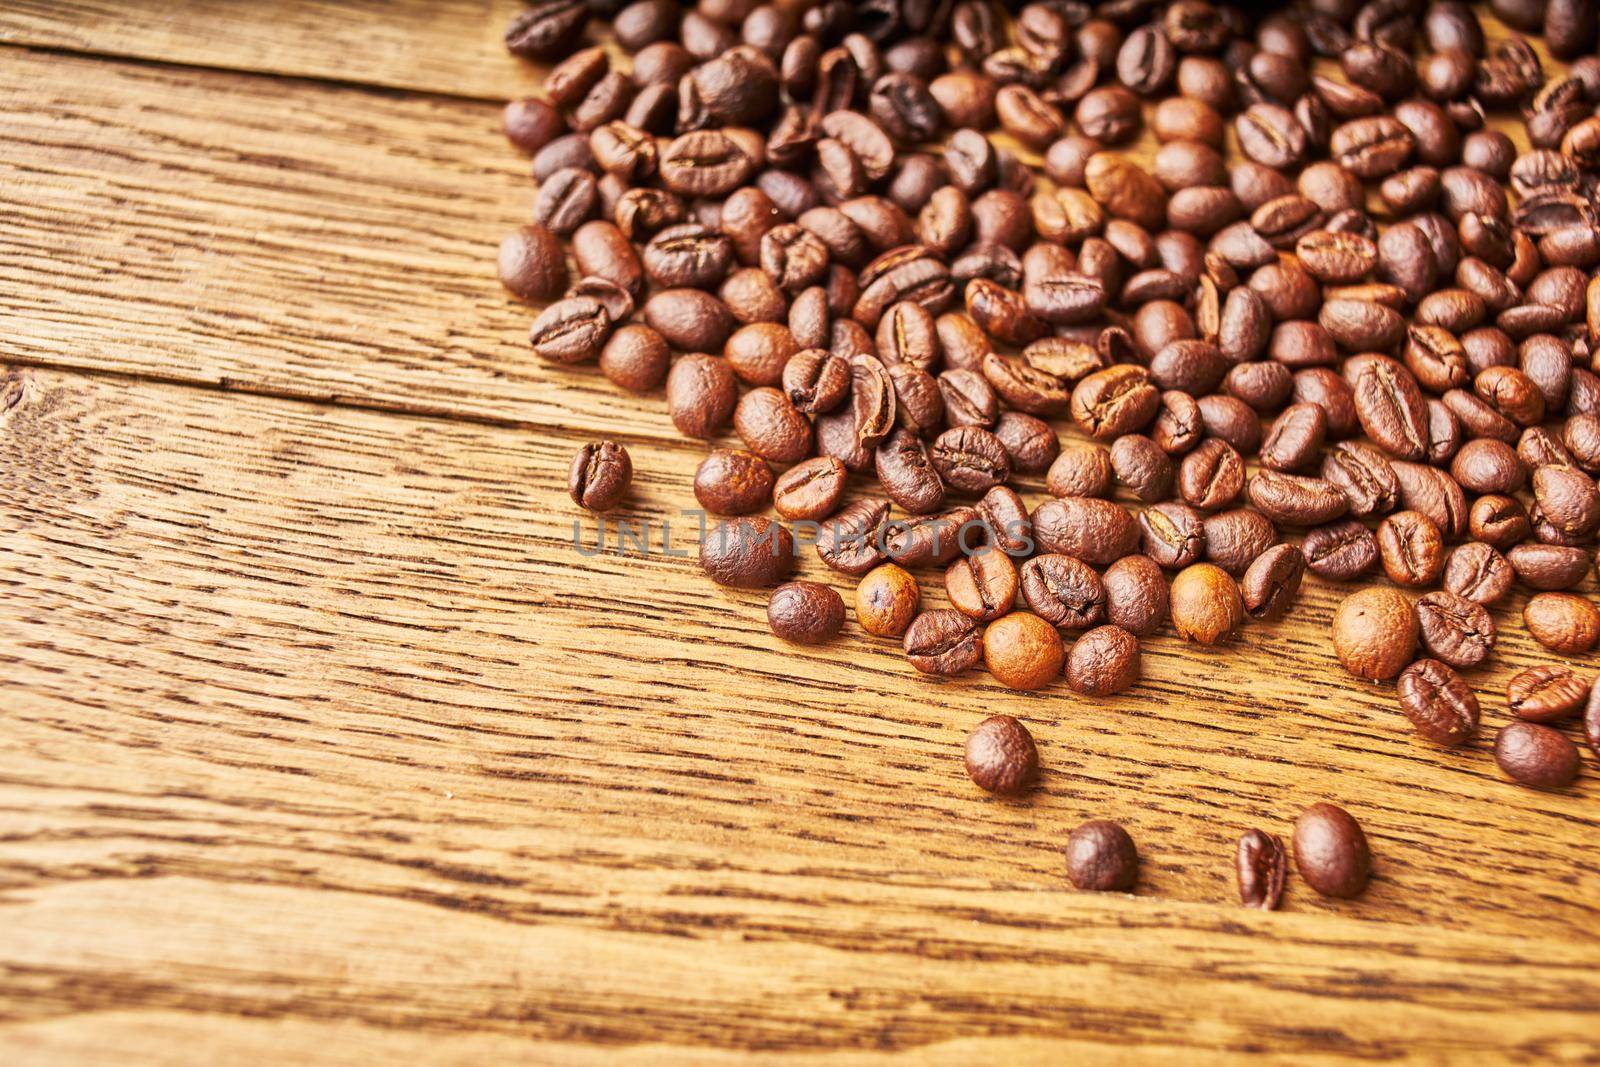 coffee beans Hot drink spilled grains wood background. High quality photo